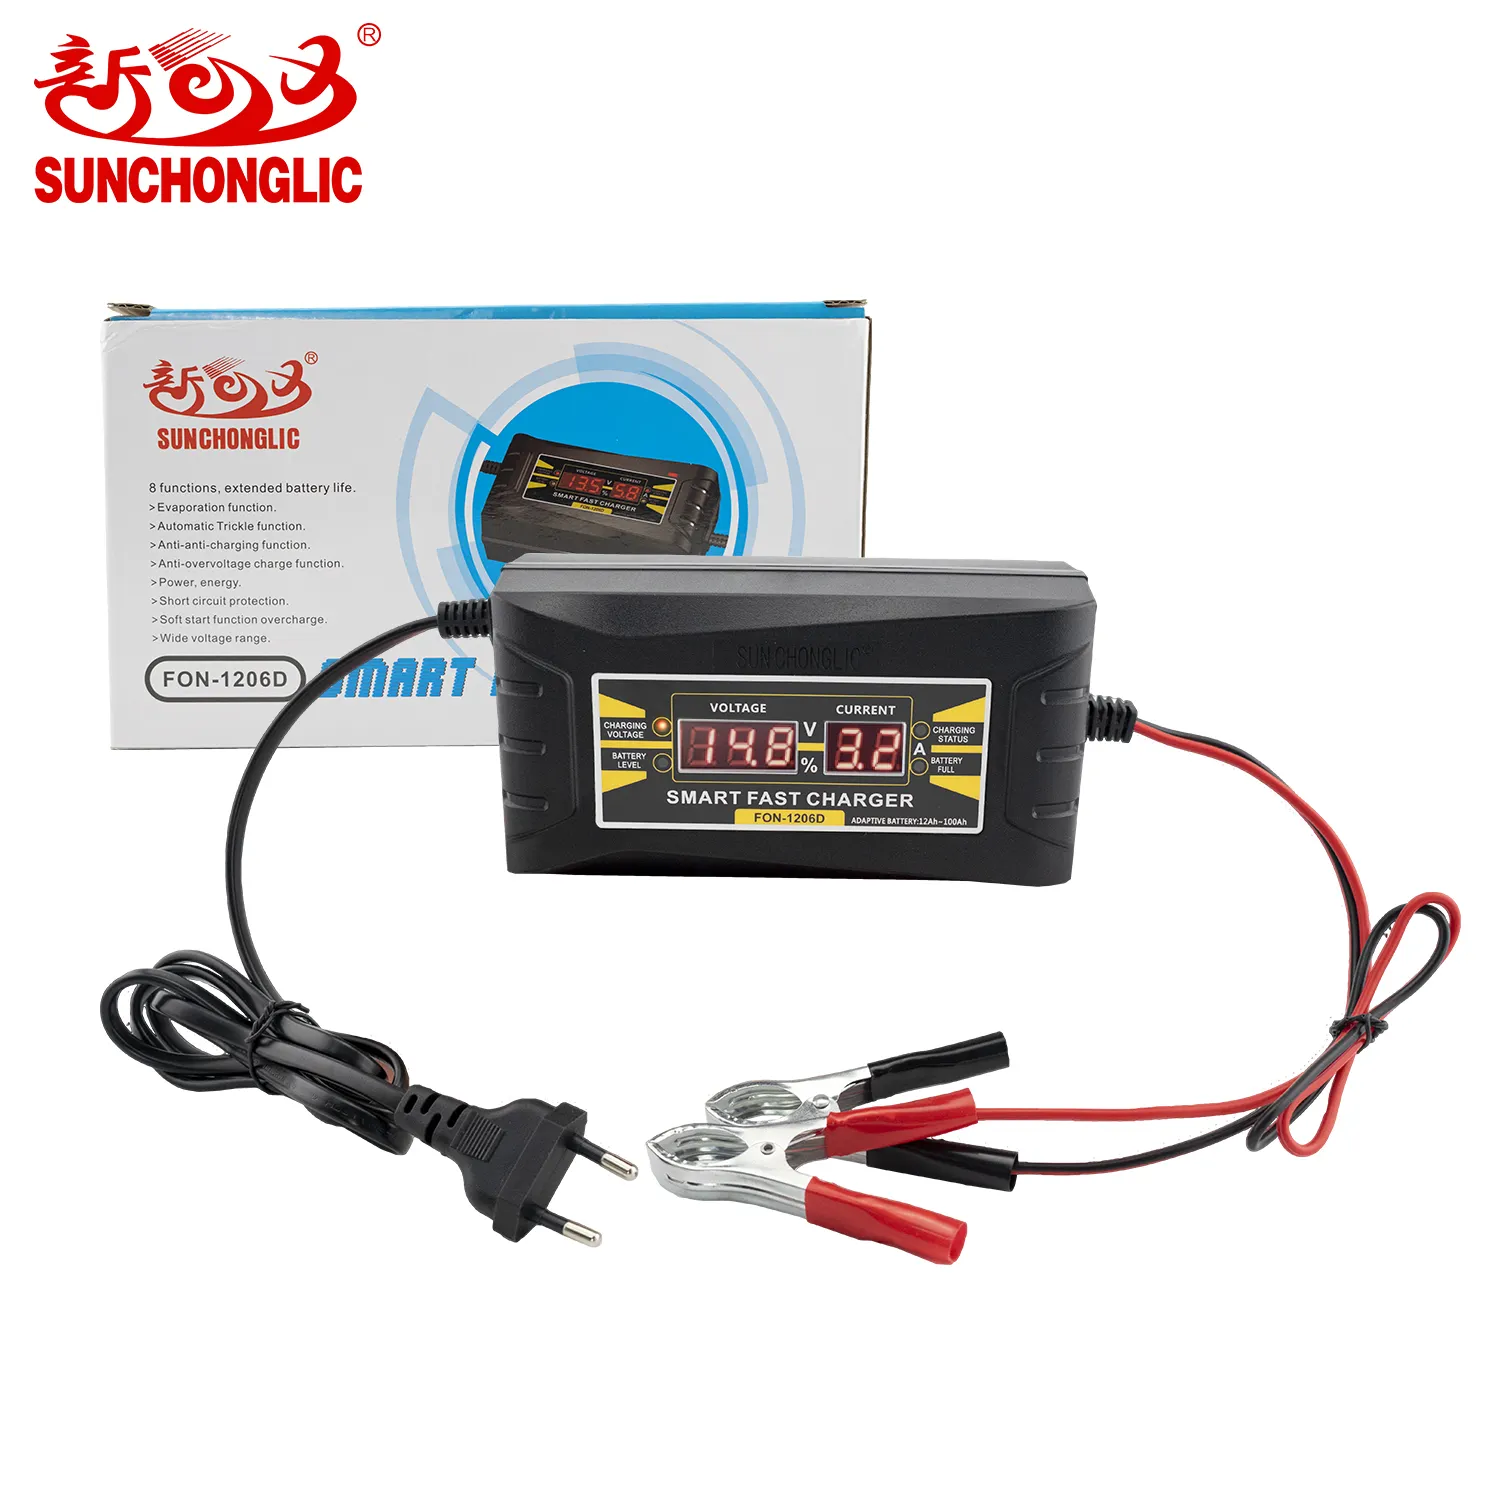 Sunchonglic LCD Display 6A 12V Gel Universal Intelligent Smart Fast Battery Charger